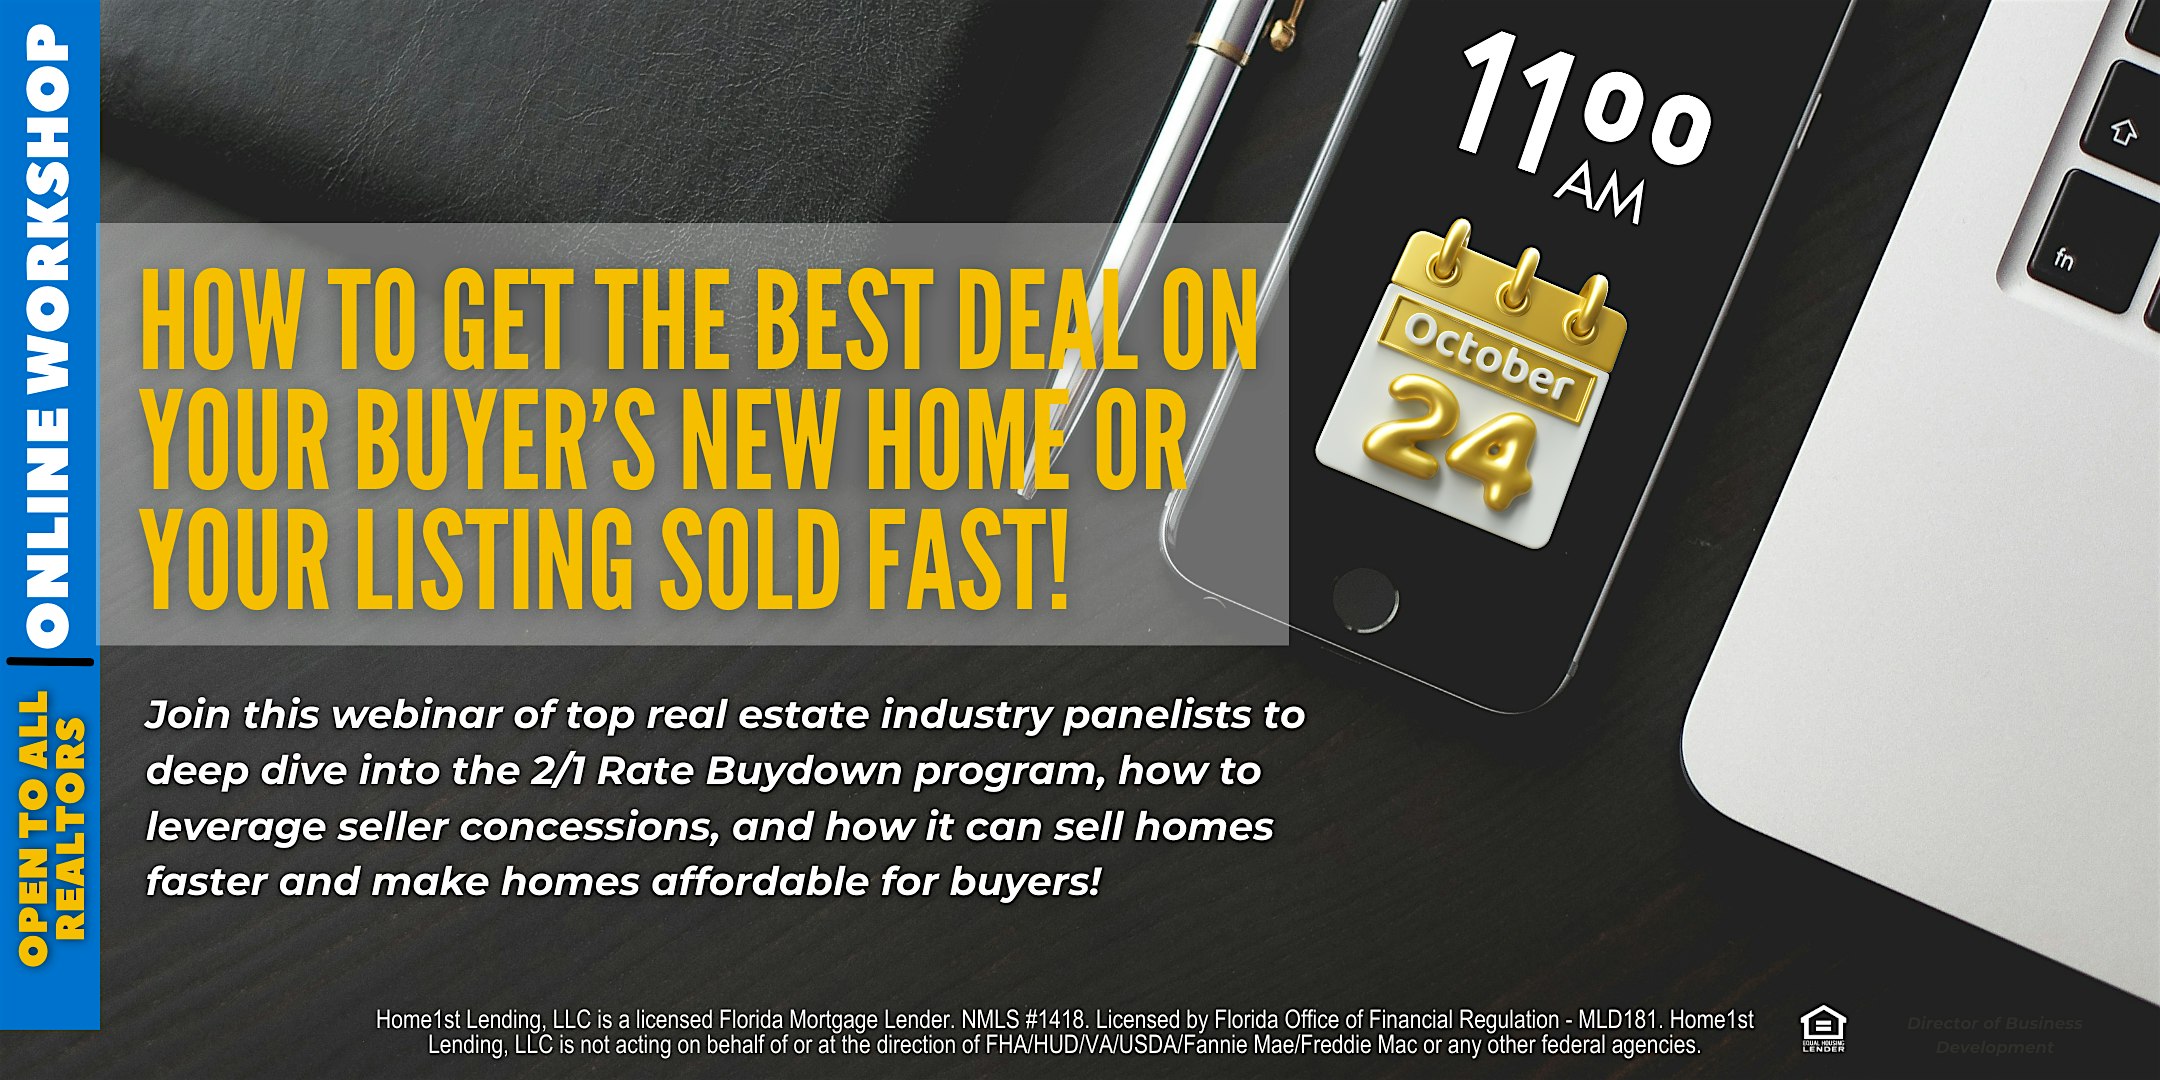 How To Get The Best Deal On Your New Home Or Your Listing Sold Fast!